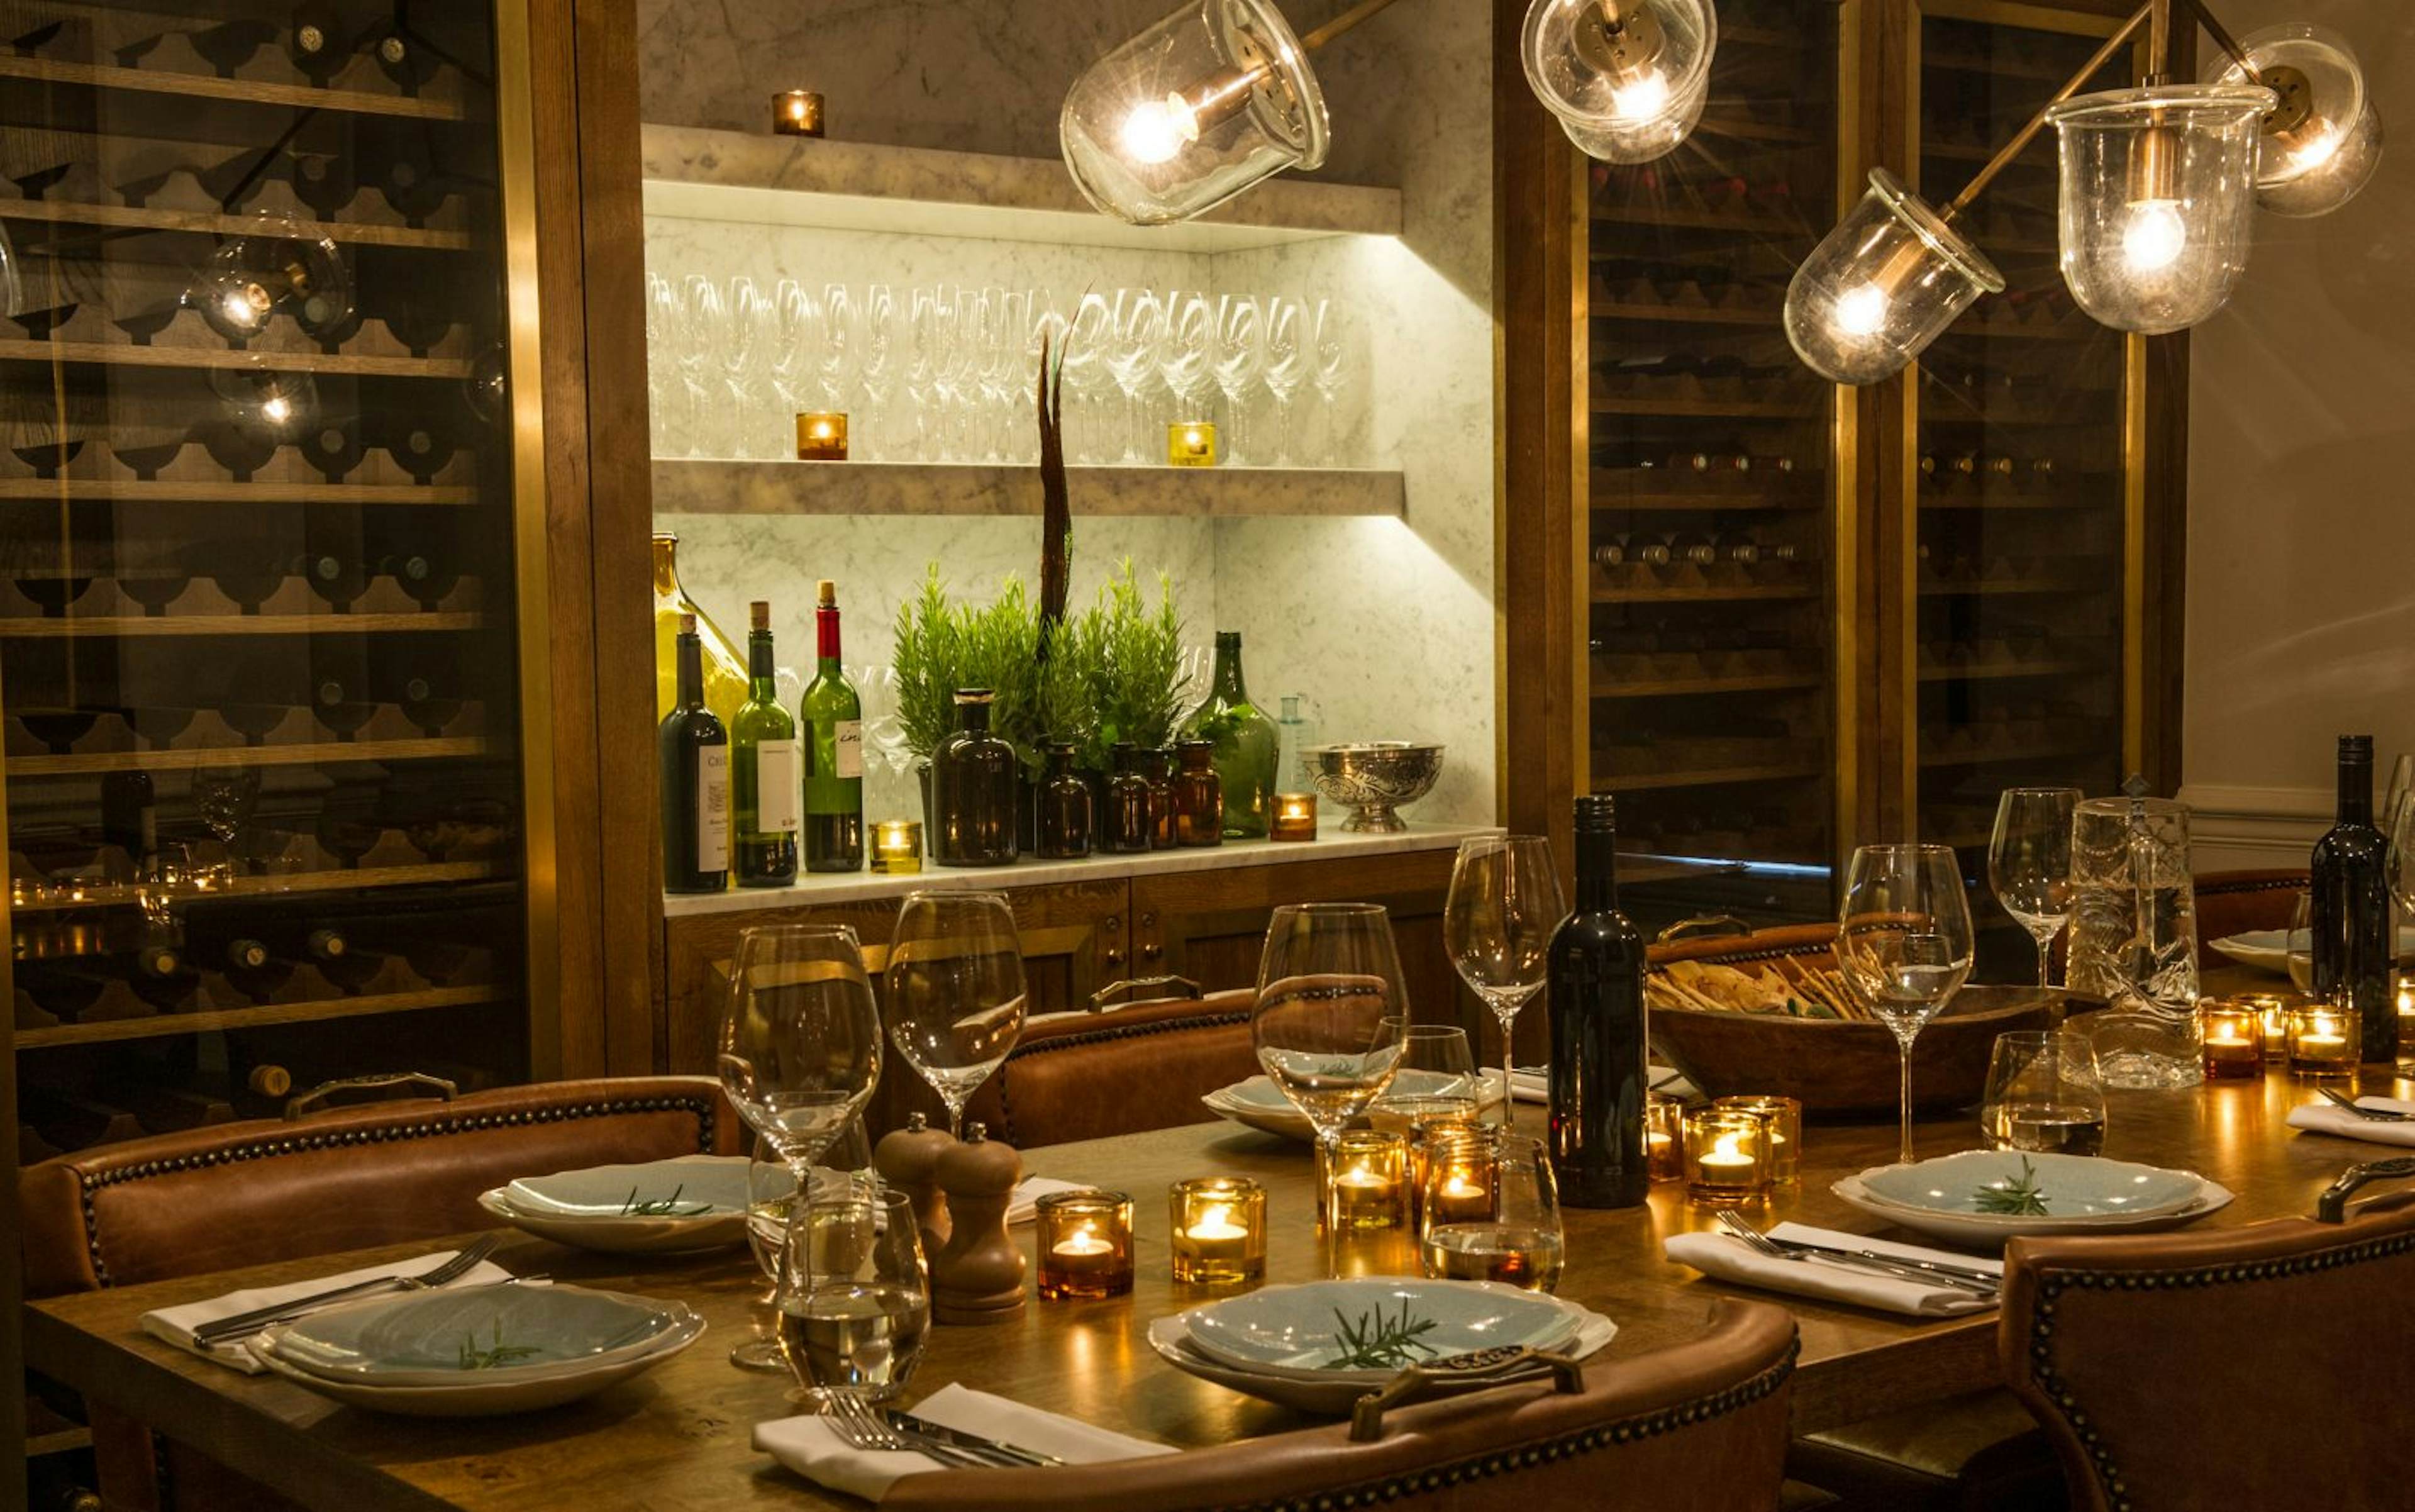 The Ampersand Hotel - The Wine Room image 1